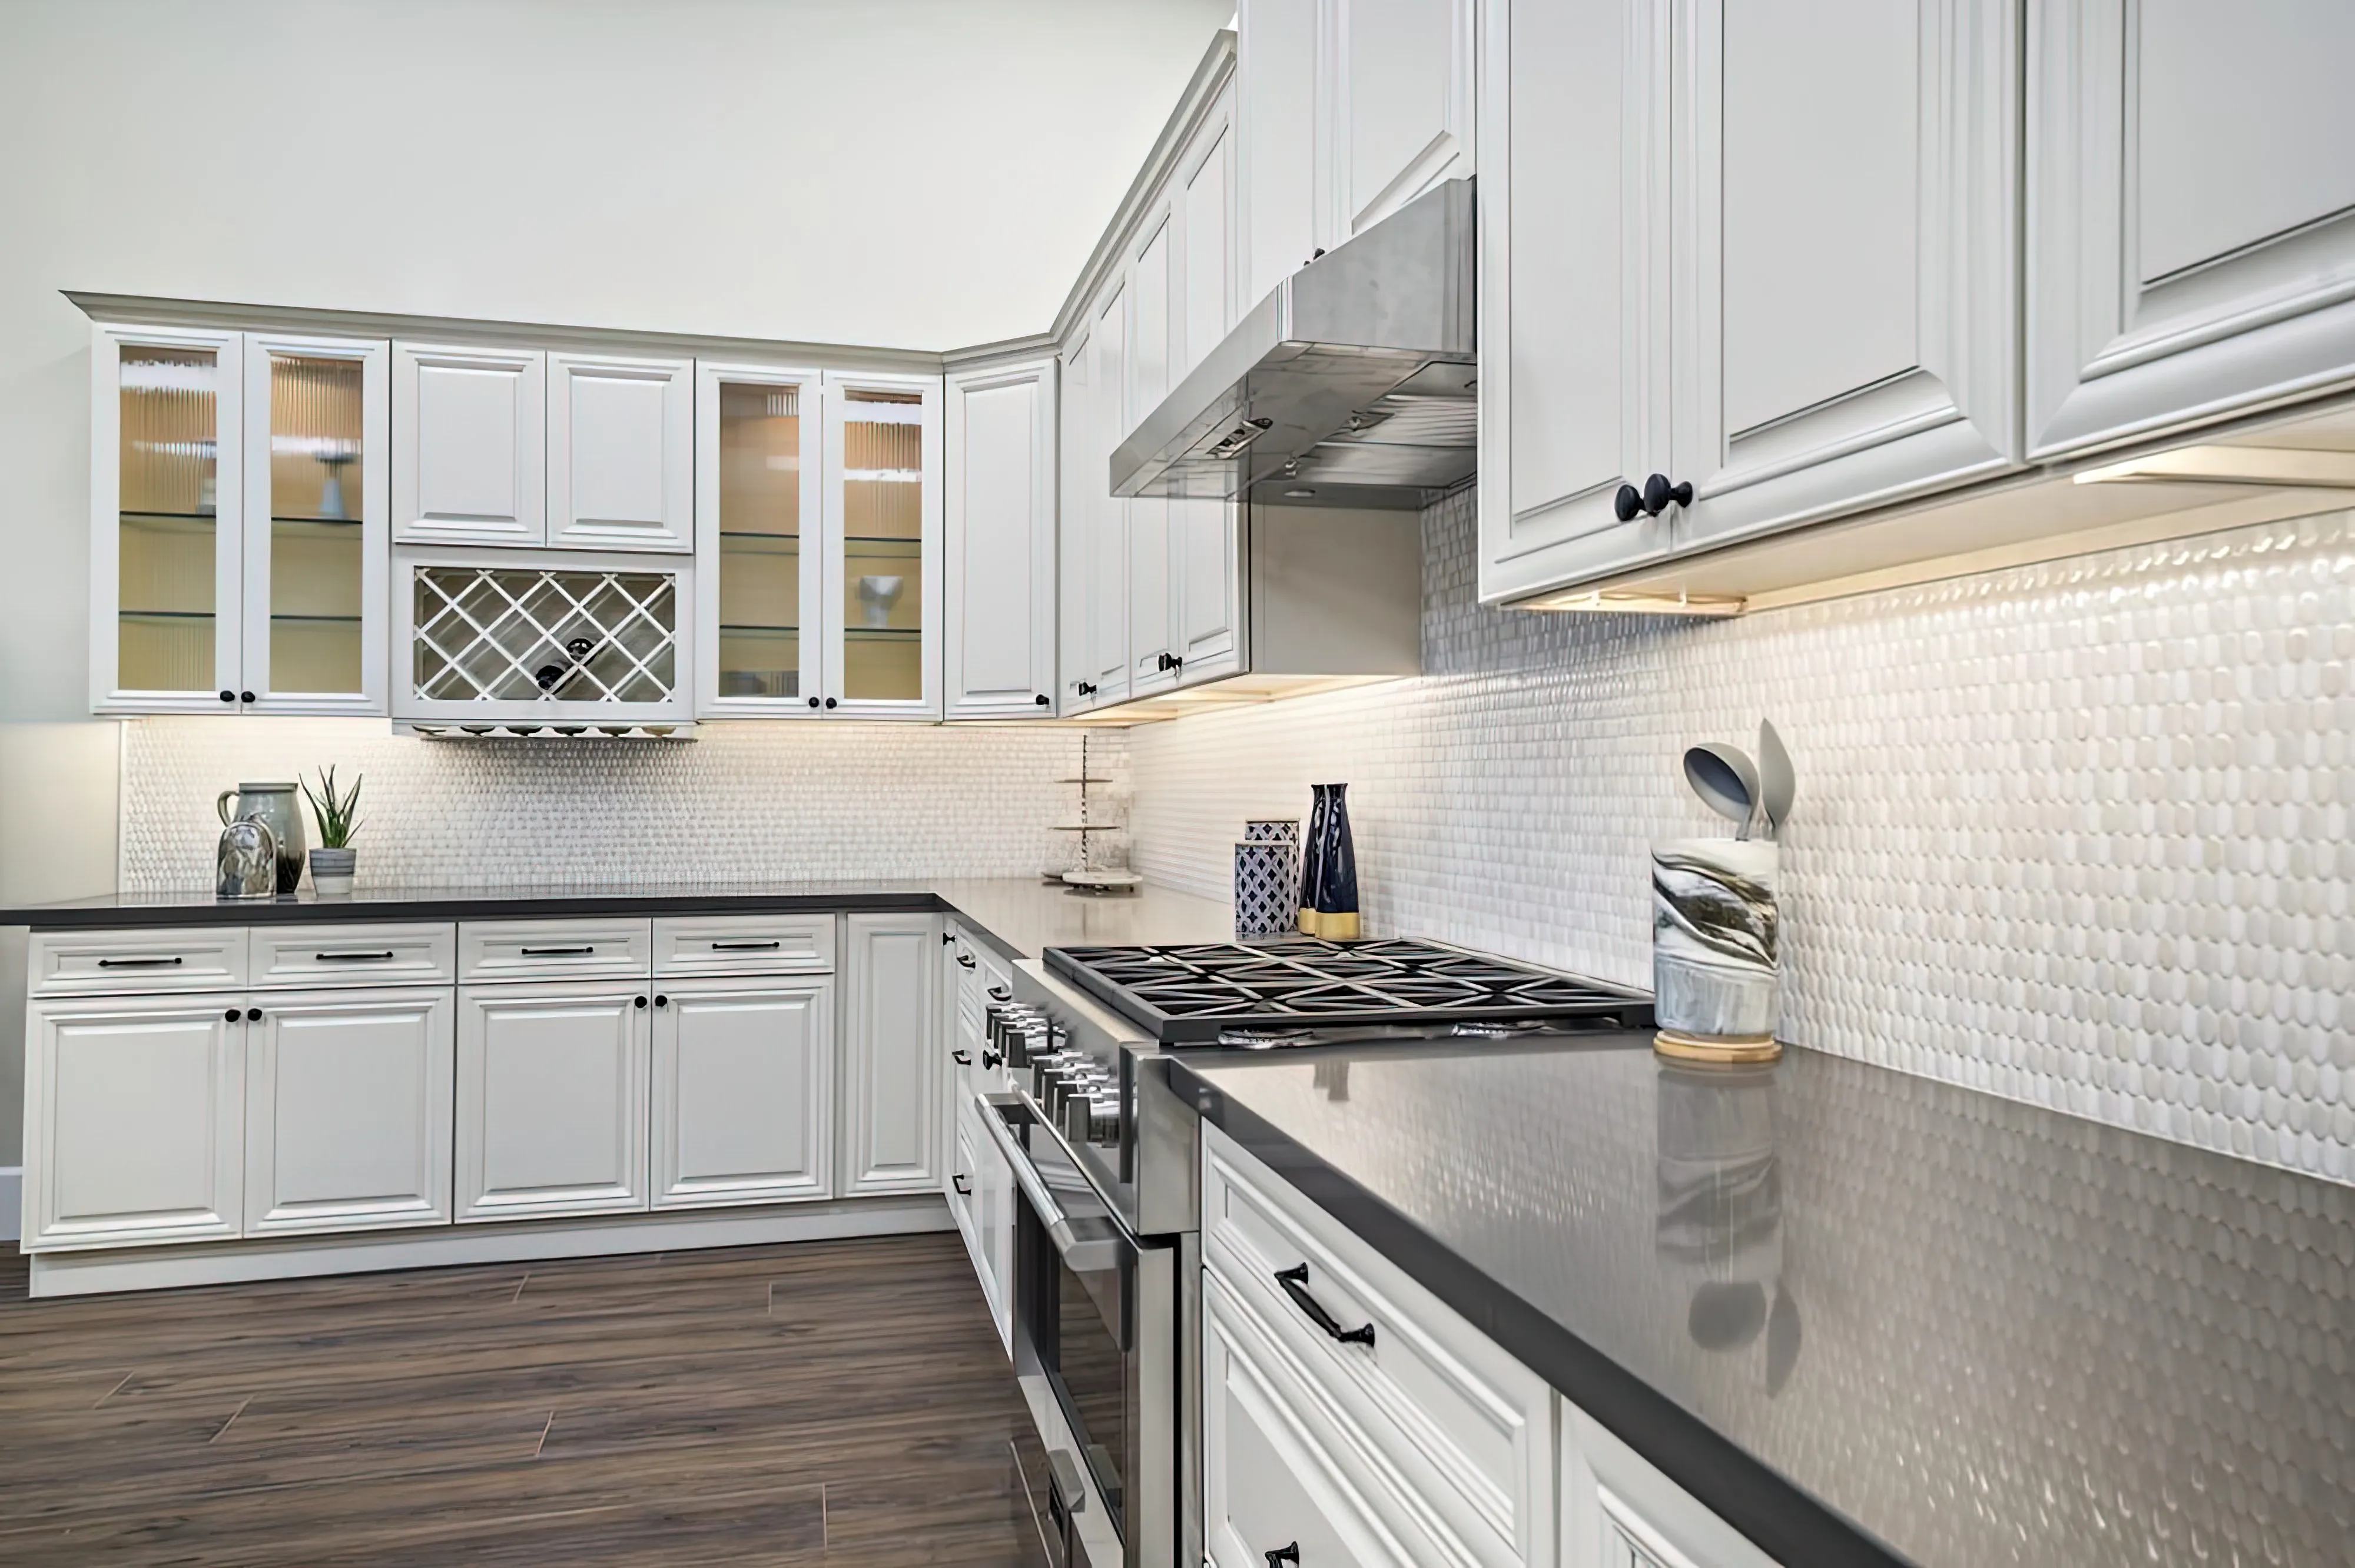 Just like the name: An L-shaped kitchen layout features two perpendicular walls, one longer and one that's shorter.